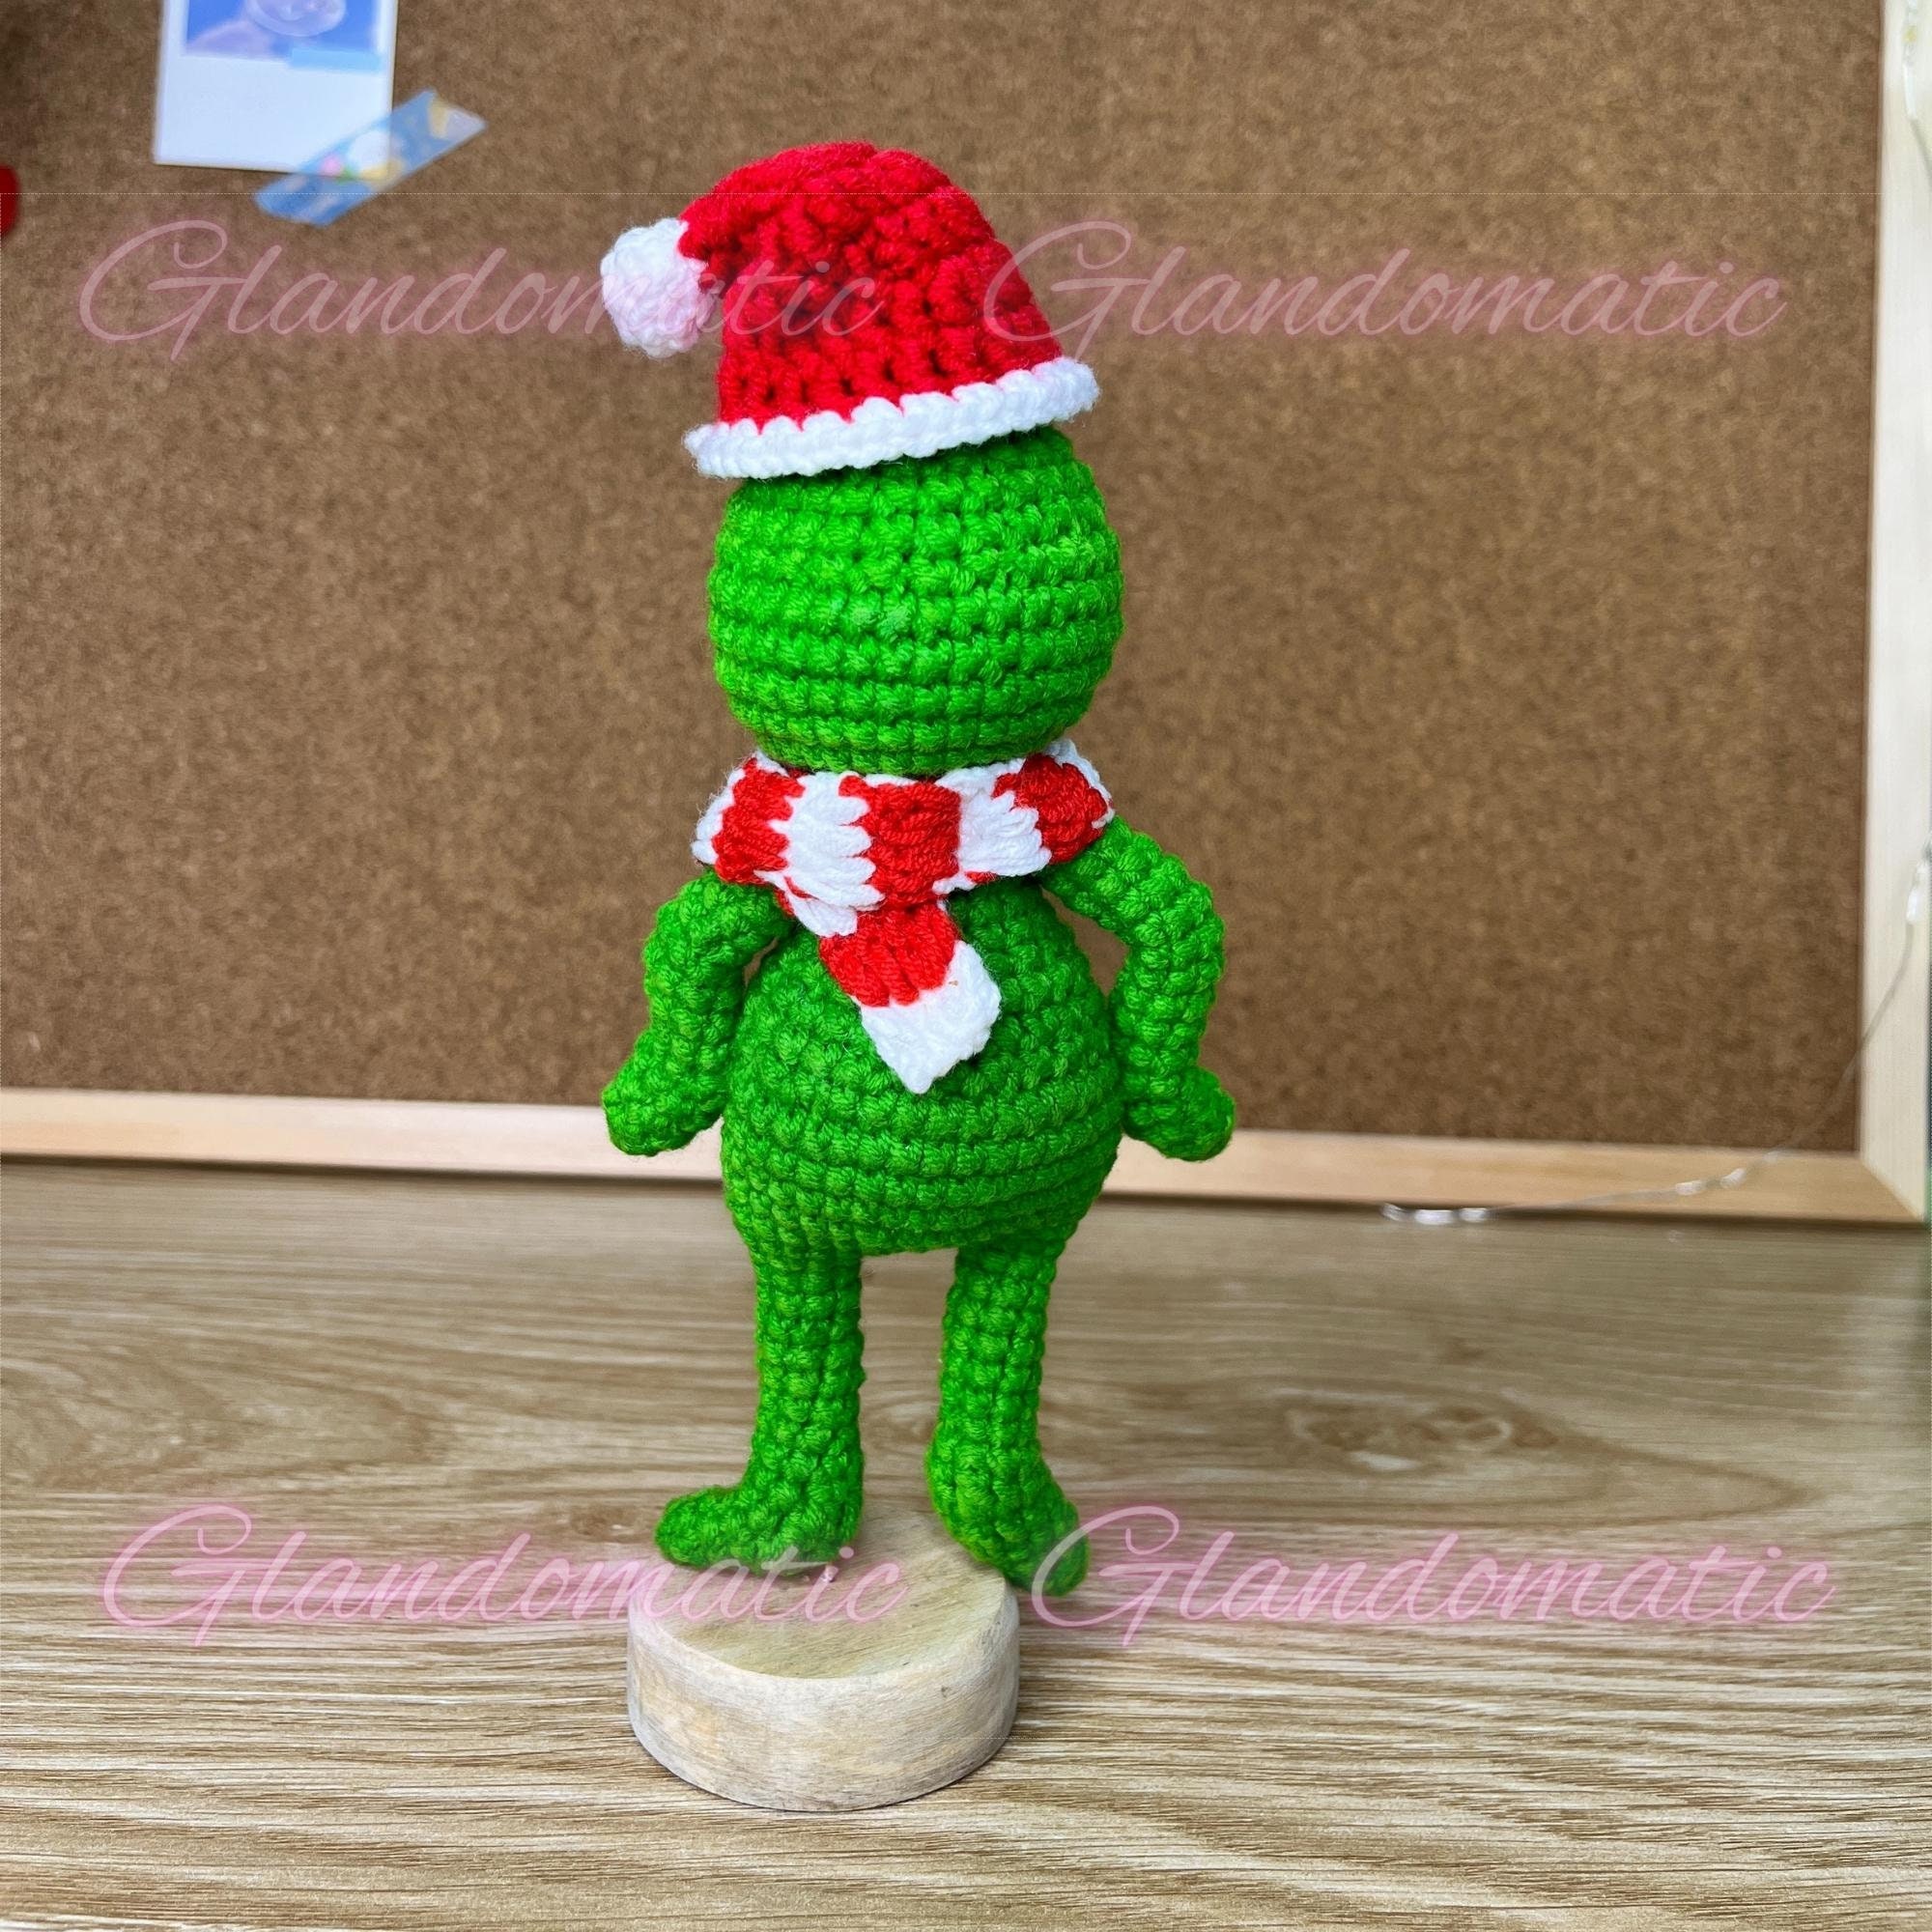 Squishy the Grinch How the Grinch Stole Christmas Whoville Squishmallow  Crochetmallow Pillow Handmade Crochet Amigurumi Plush Toy 